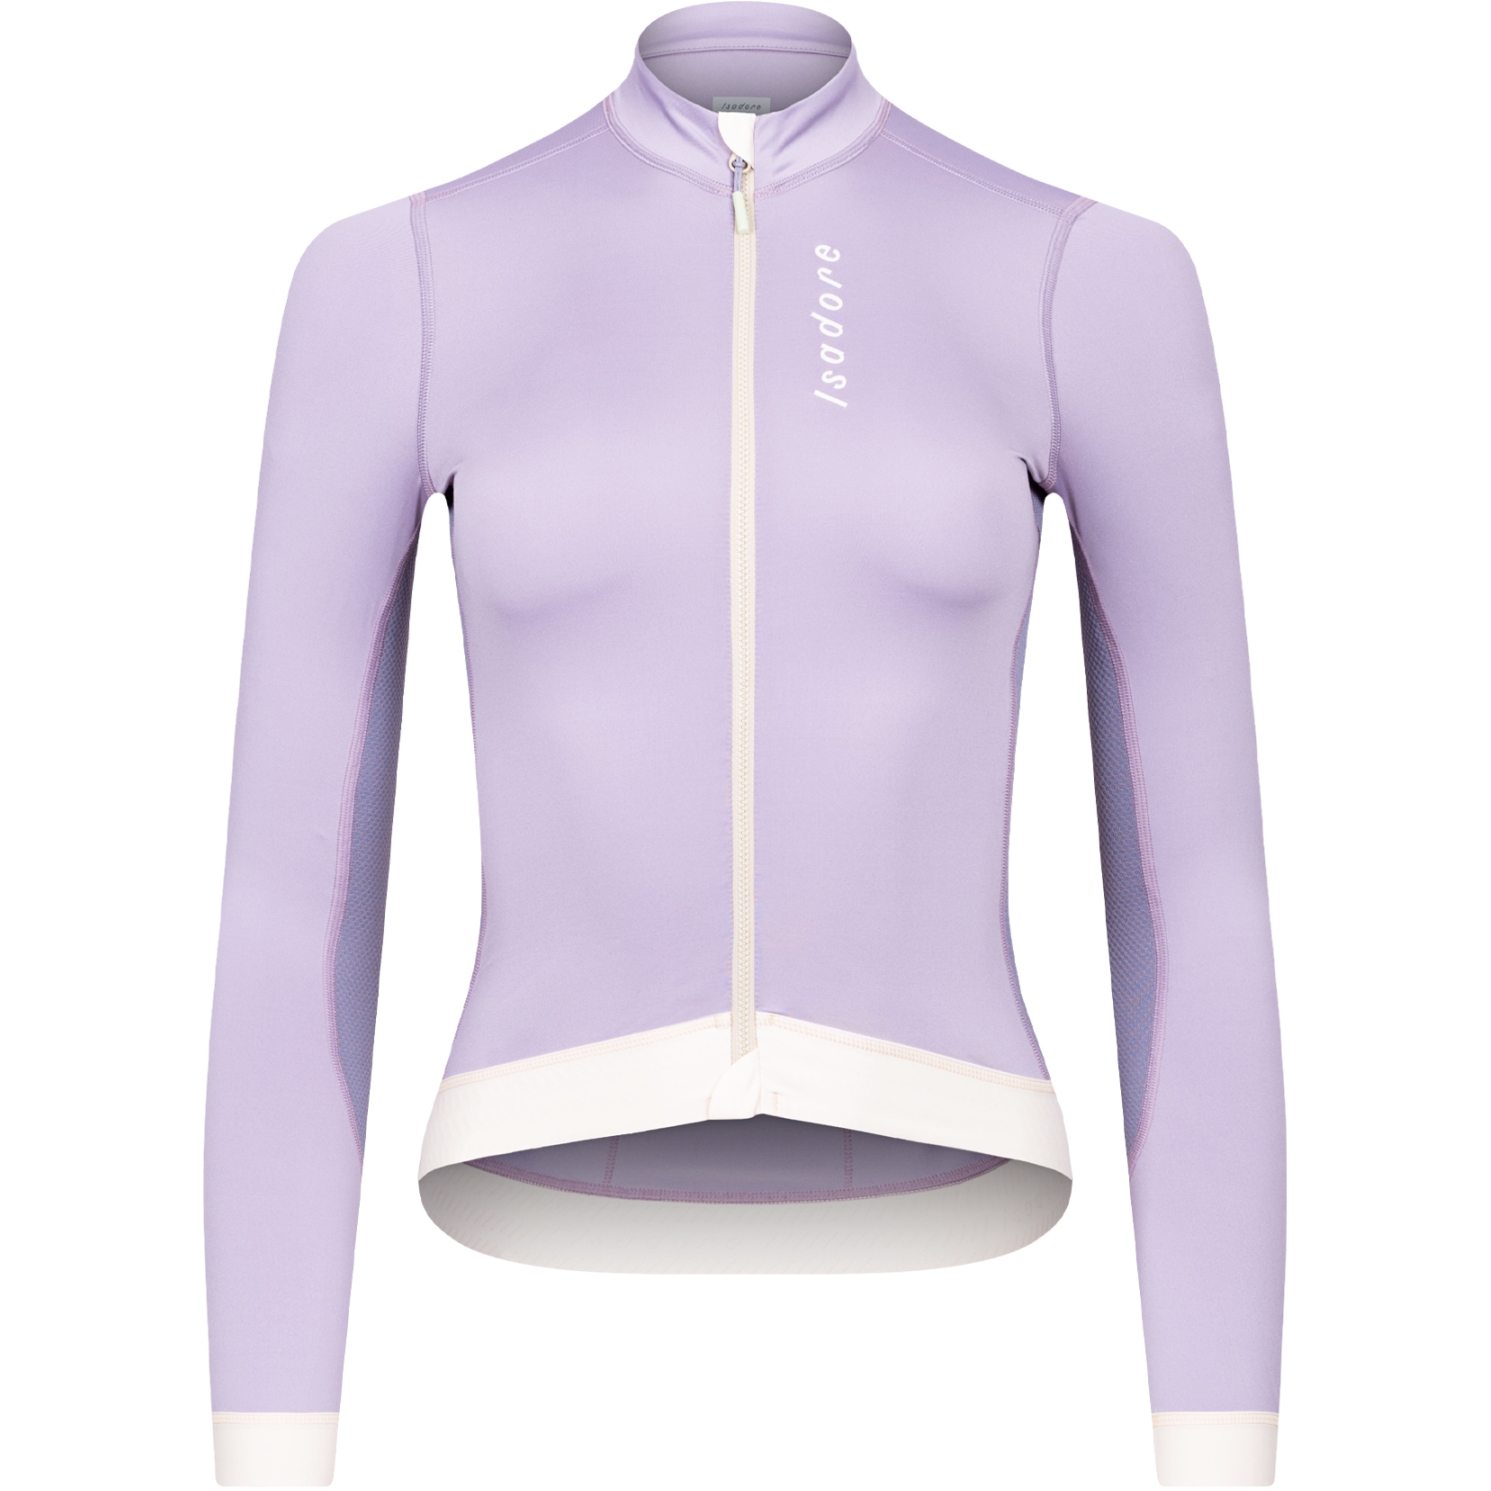 Picture of Isadore Alternative Light Long Sleeve Jersey Women - Lavender Grey